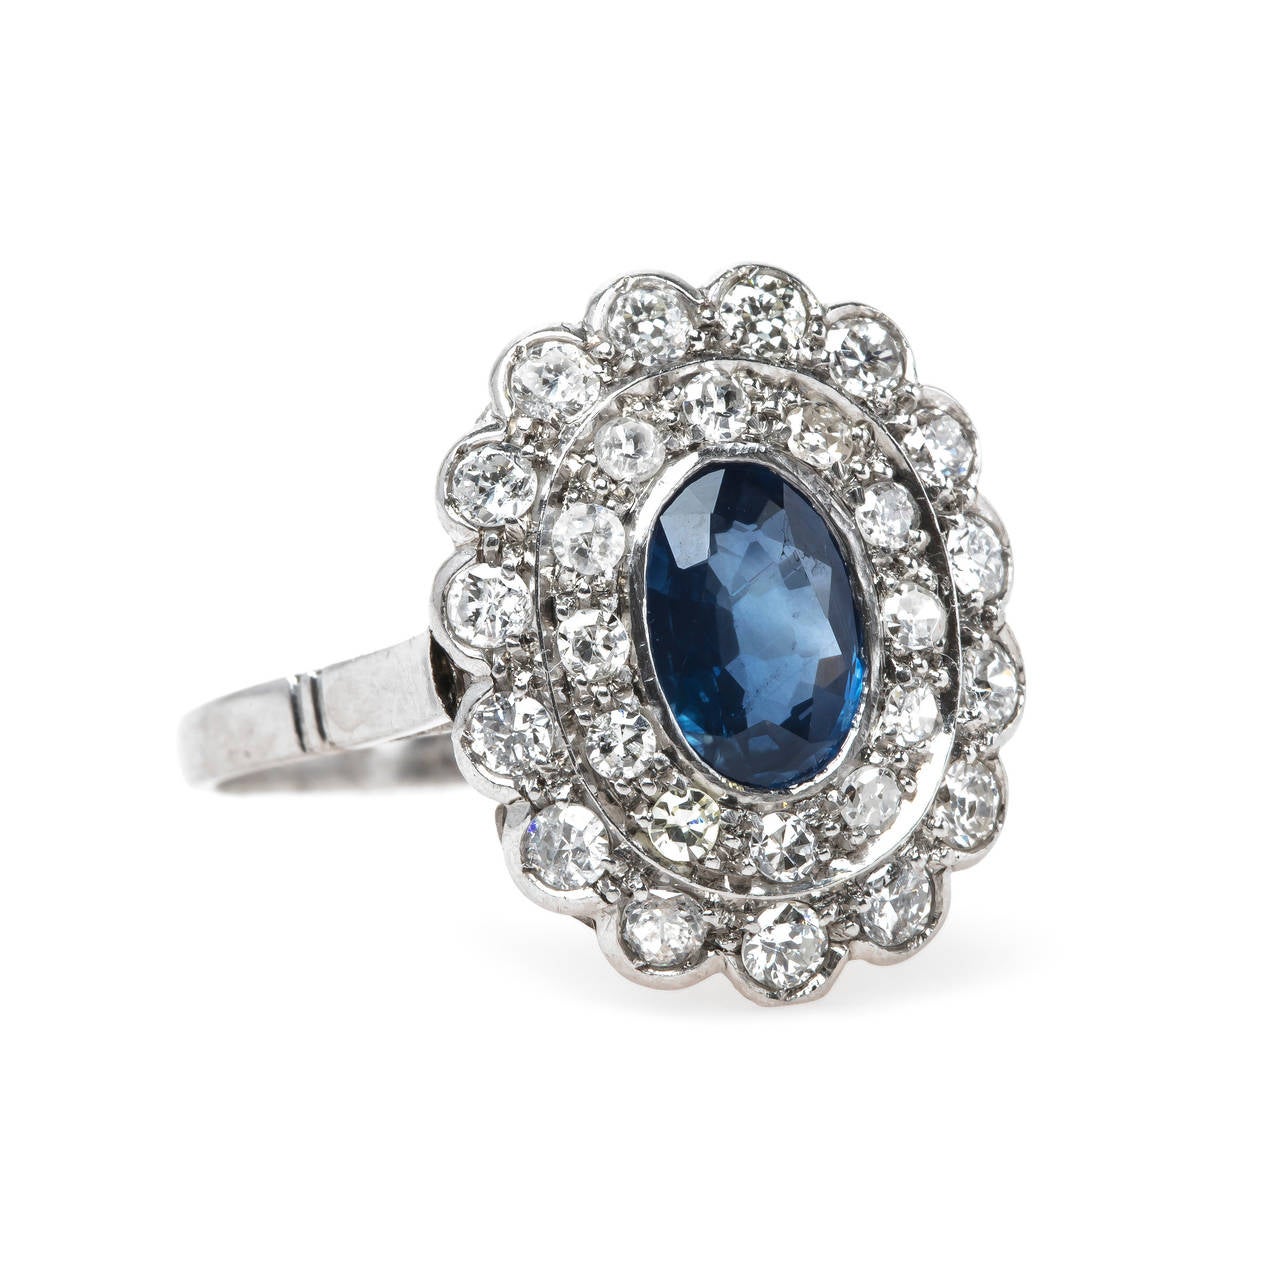 Kenosha is a fabulous authentic Late Art Deco (circa 1935) platinum ring centering a bezel-set natural oval sapphire gauged at 1.15cts accompanied by a Guild Laboratories certificate stating the sapphire is heated with Ceylon Origin. This